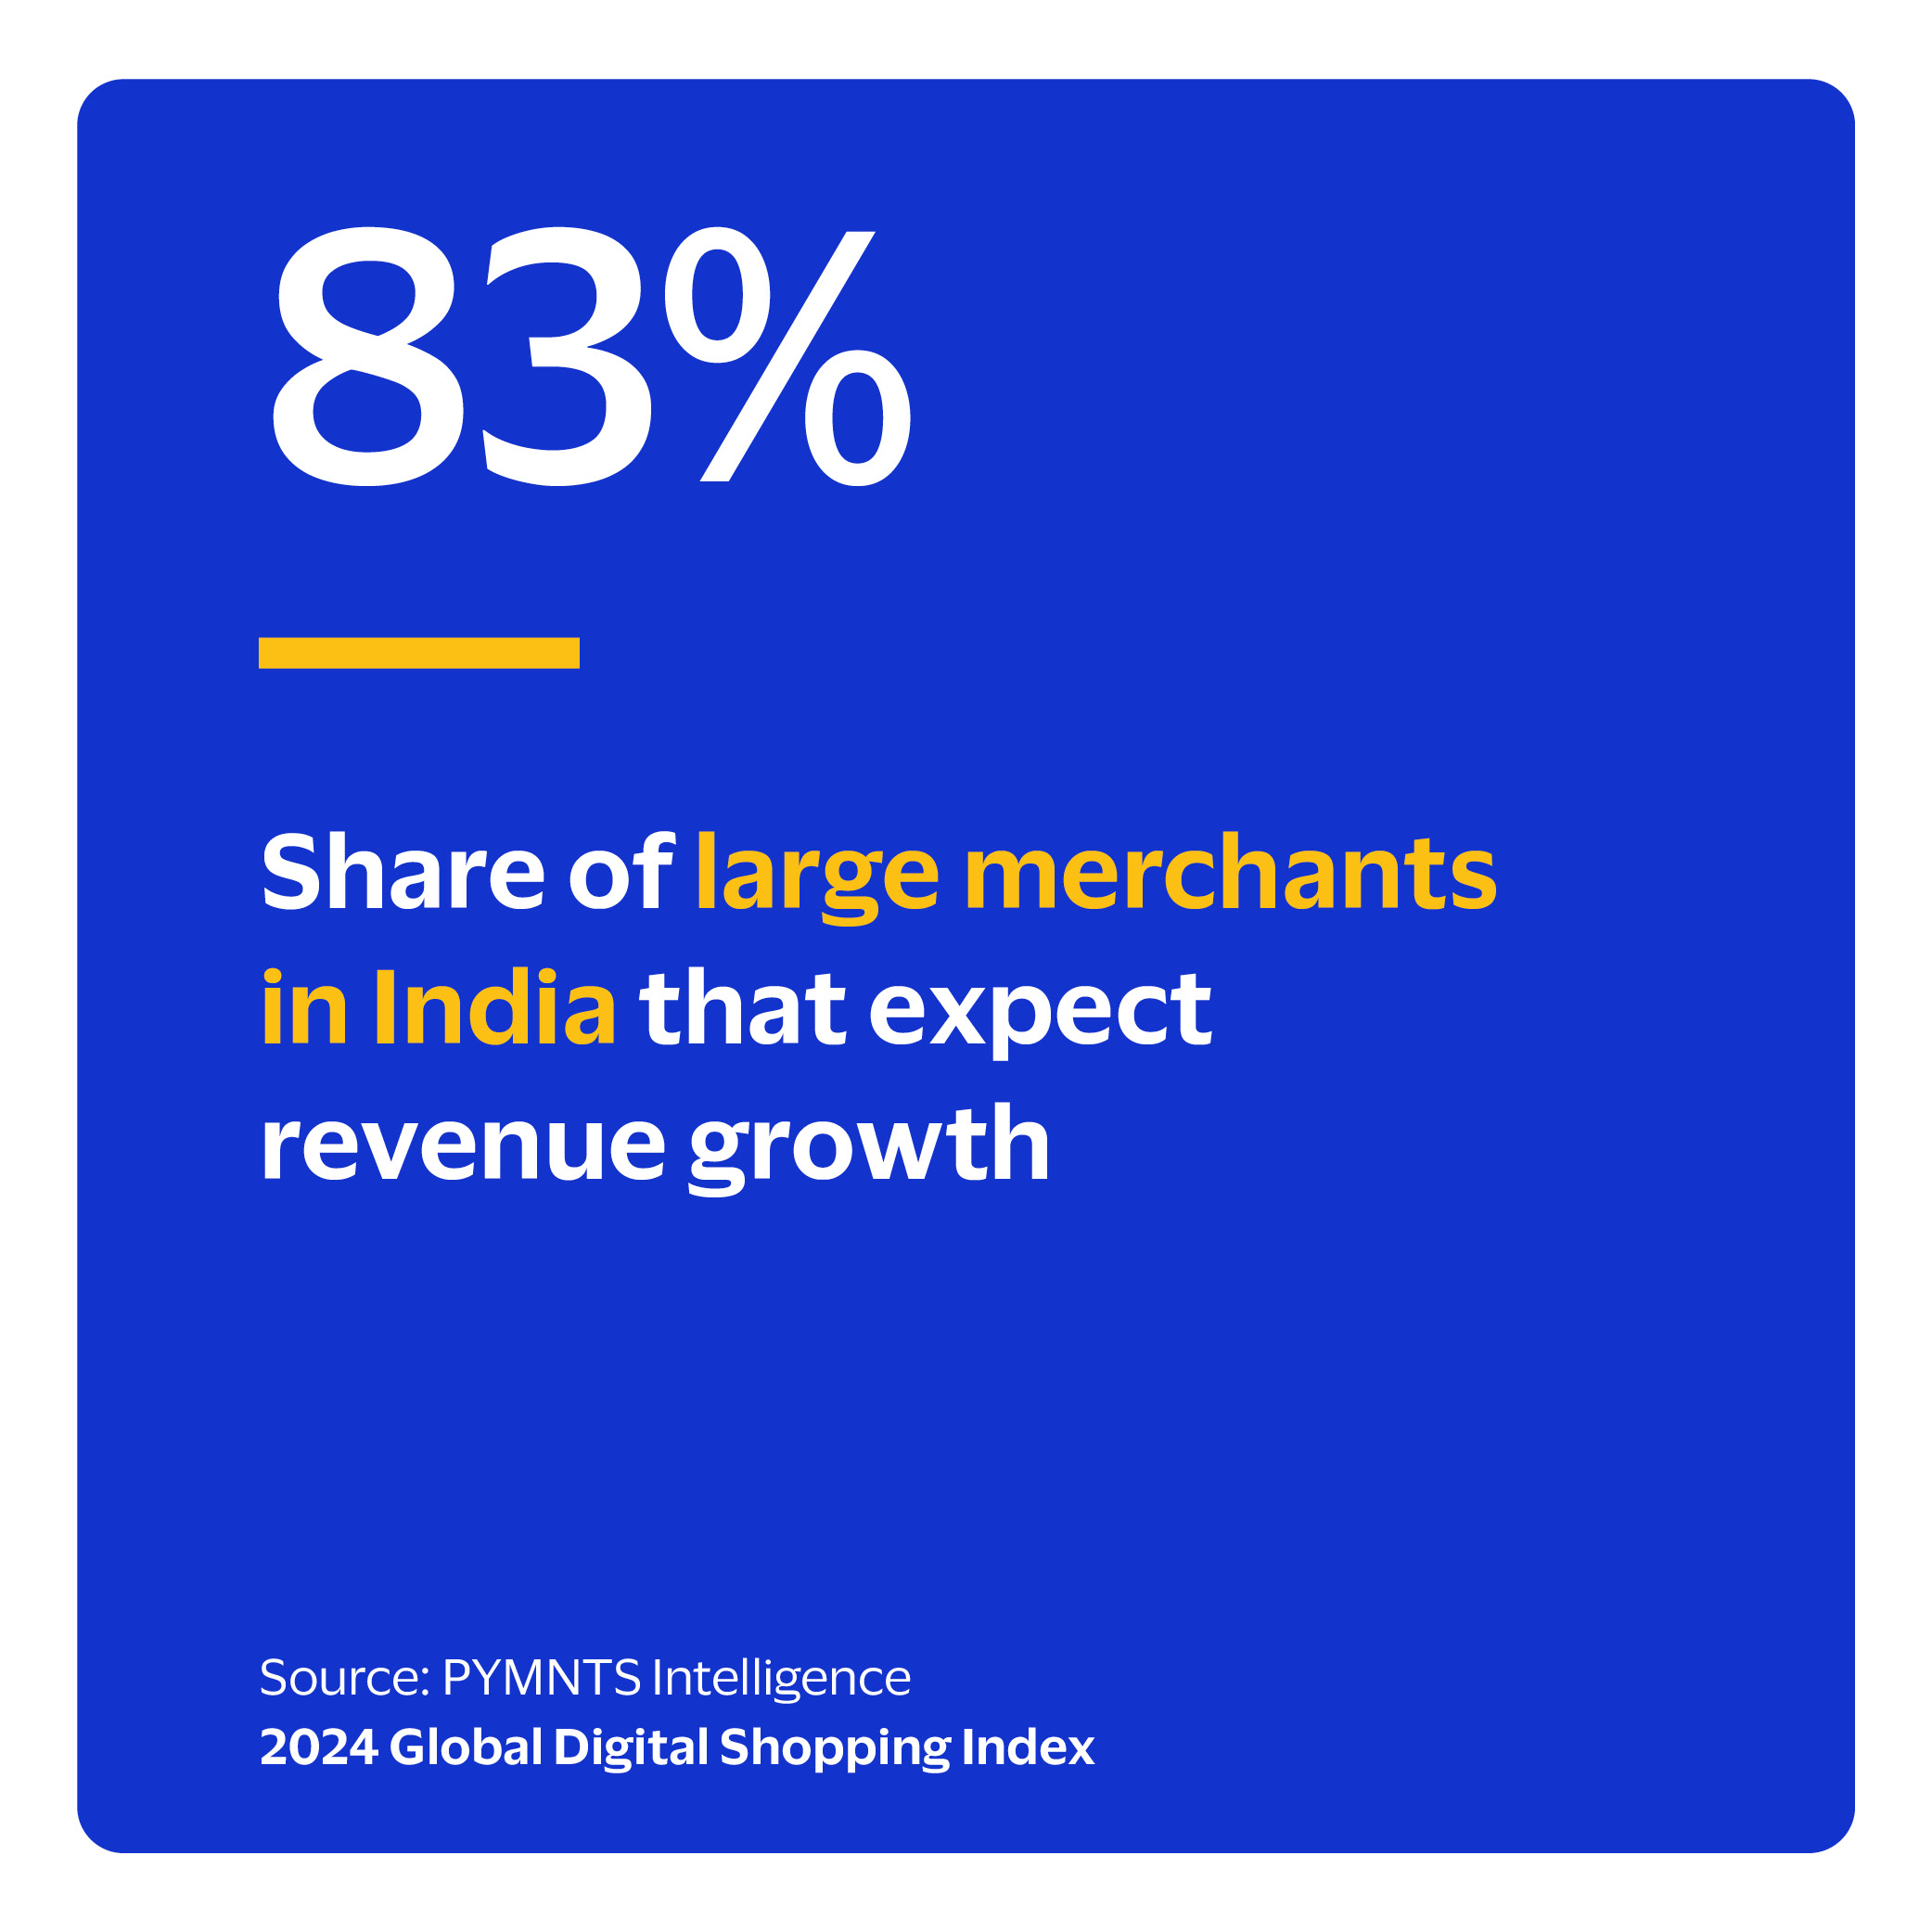 83%: Share of large merchants in India that expect revenue growth